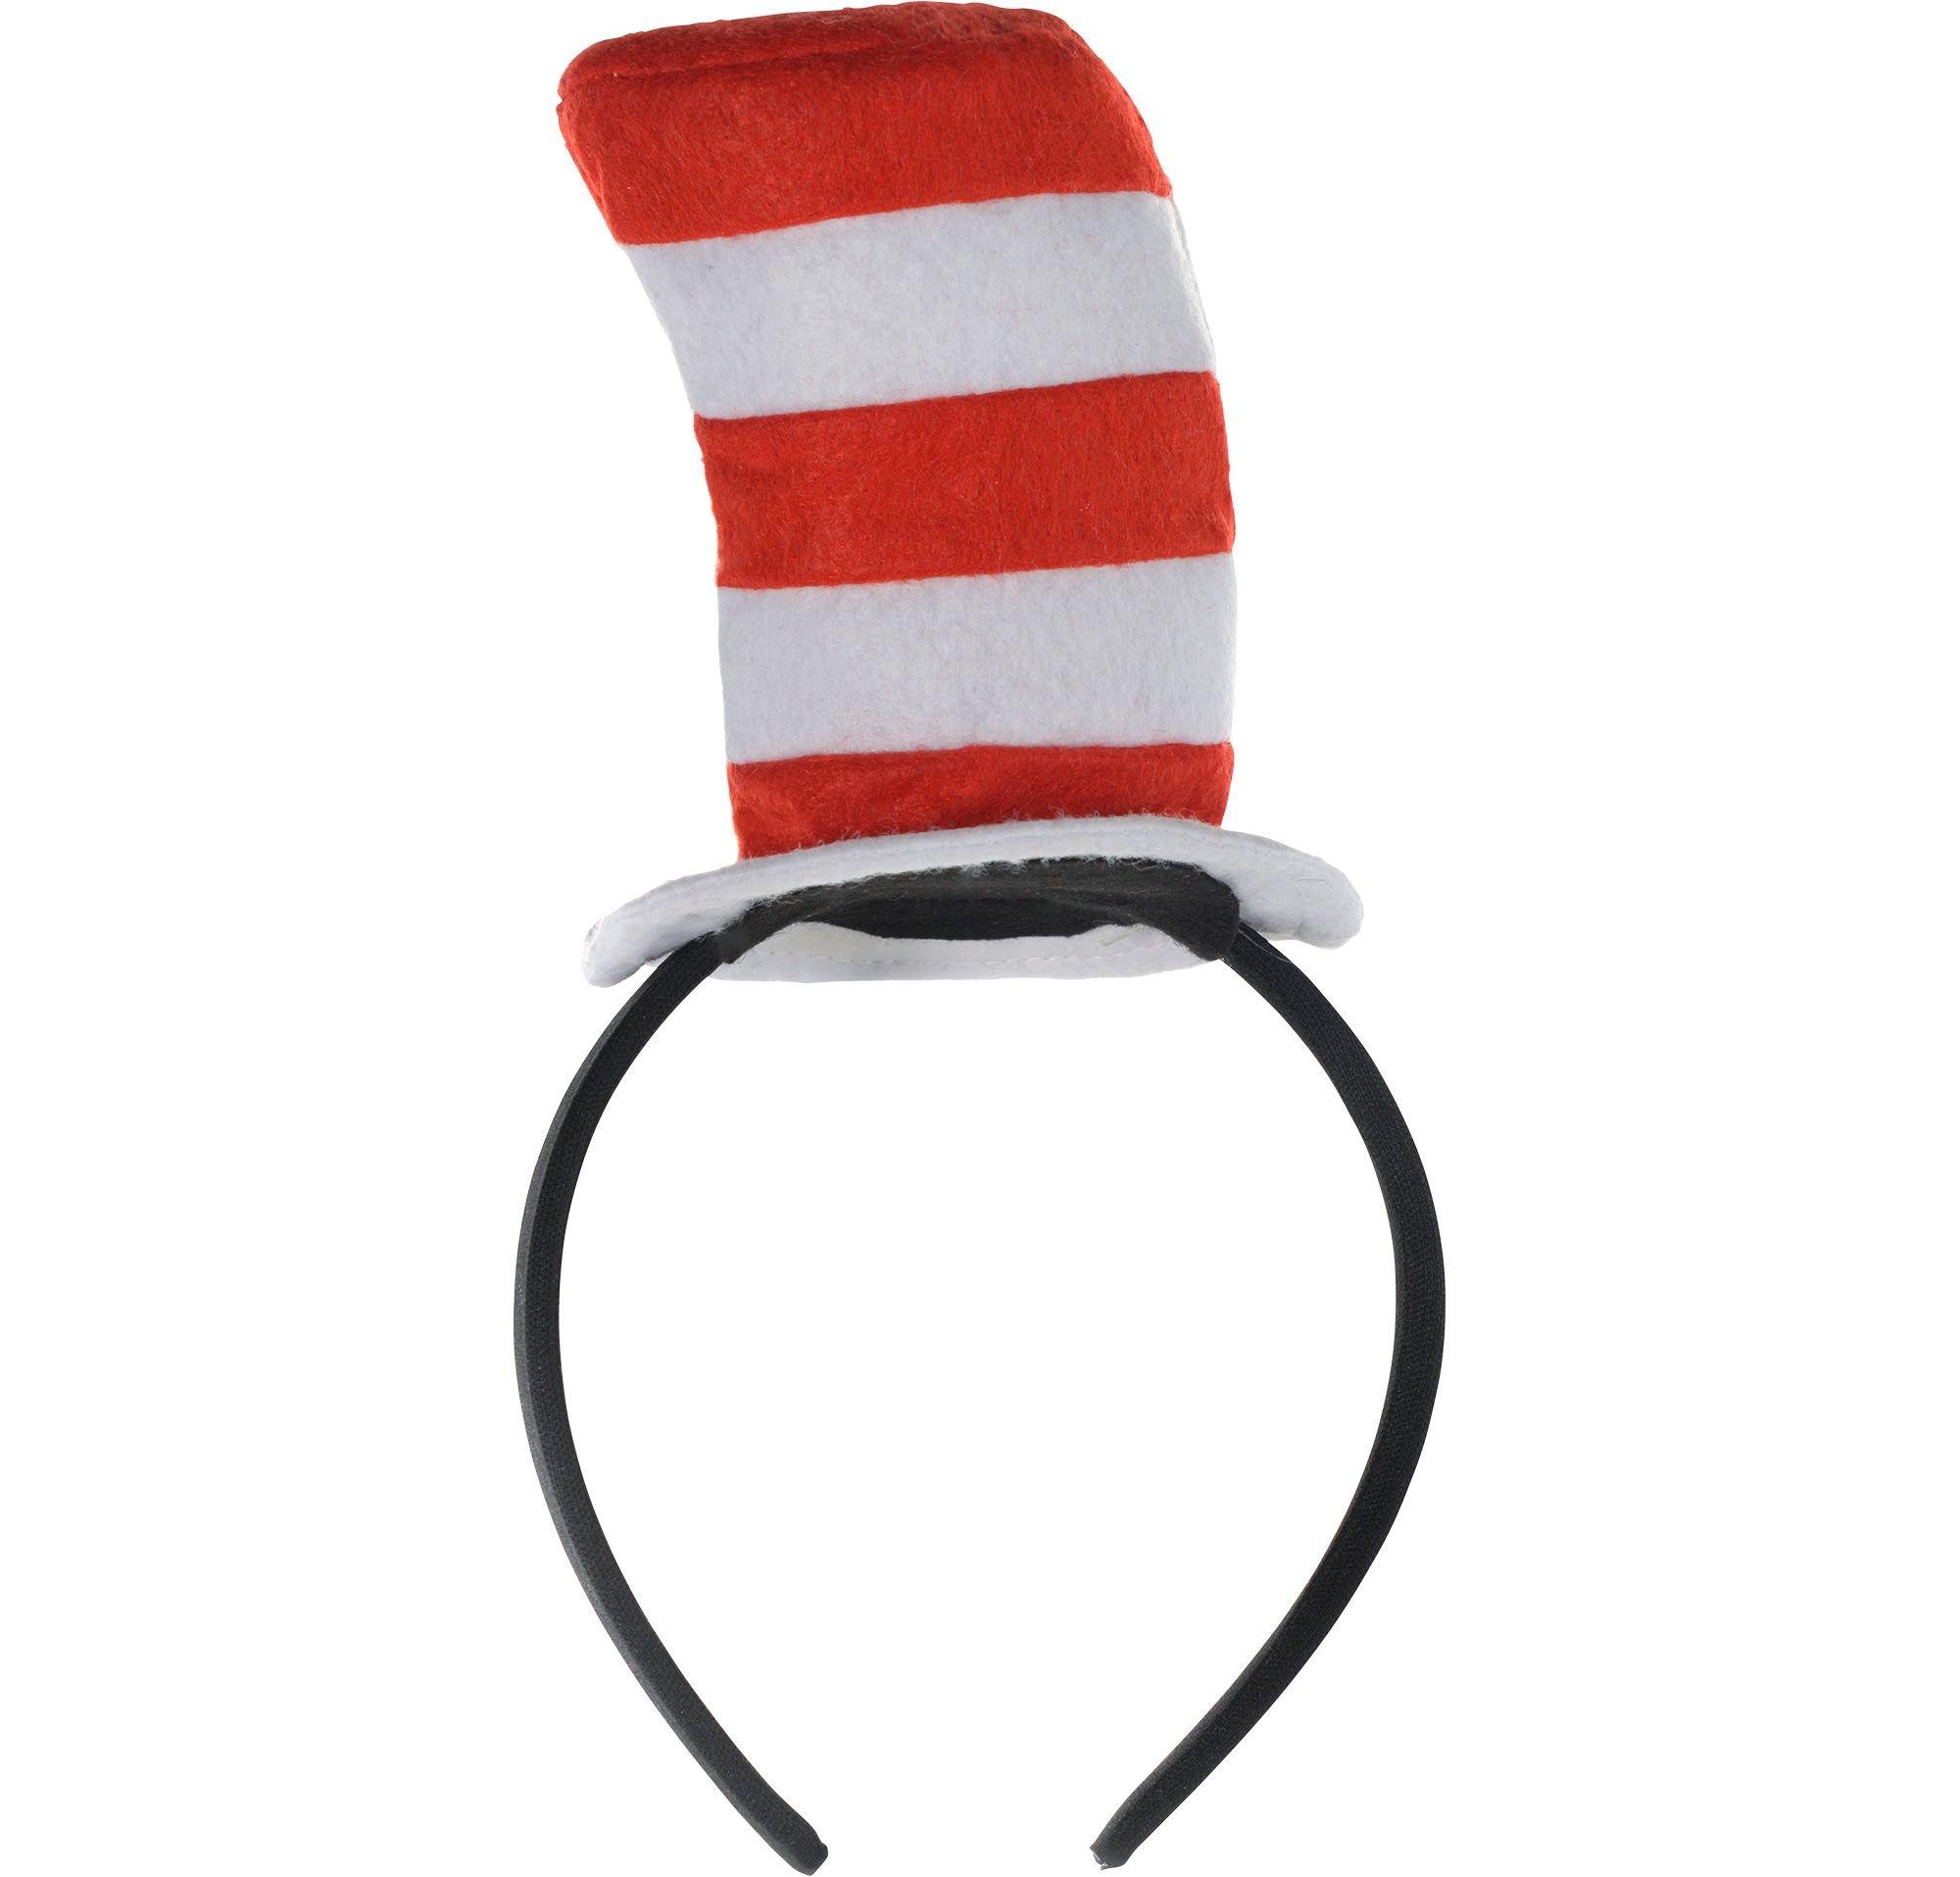 Dr. Seuss What's in the Cat's Hat? Game - Epic Kids Toys